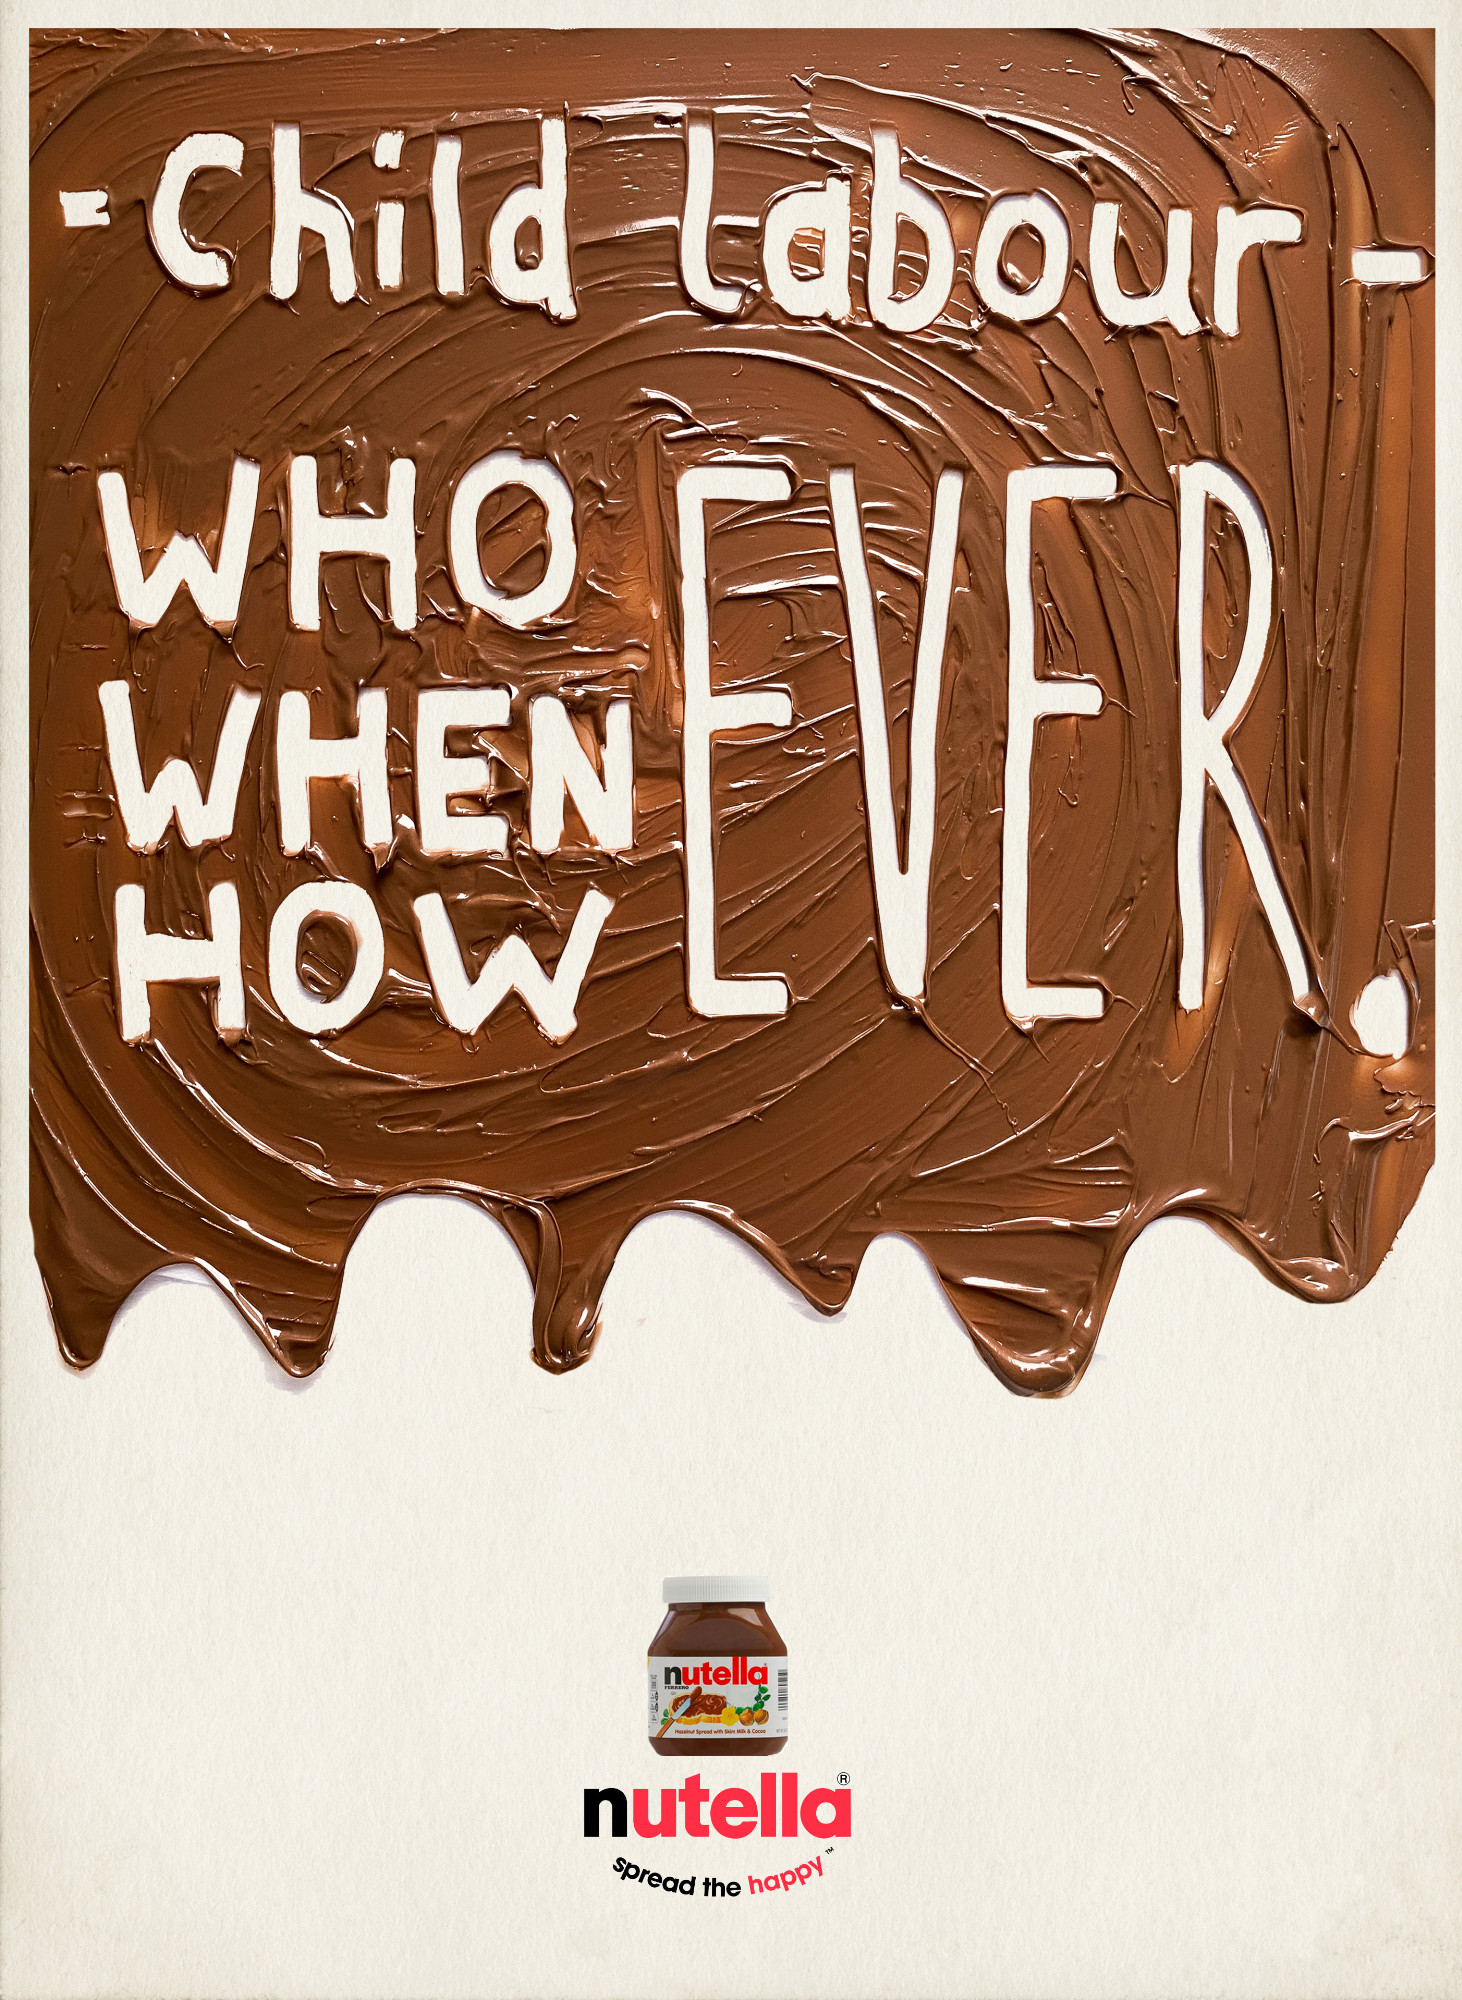 This design uses play-on words, similarly phrased to the original advertisement, to focus on the child labour used by Ferrero to pick the millions of hazelnuts used to create Nutella. Bryony Smart.